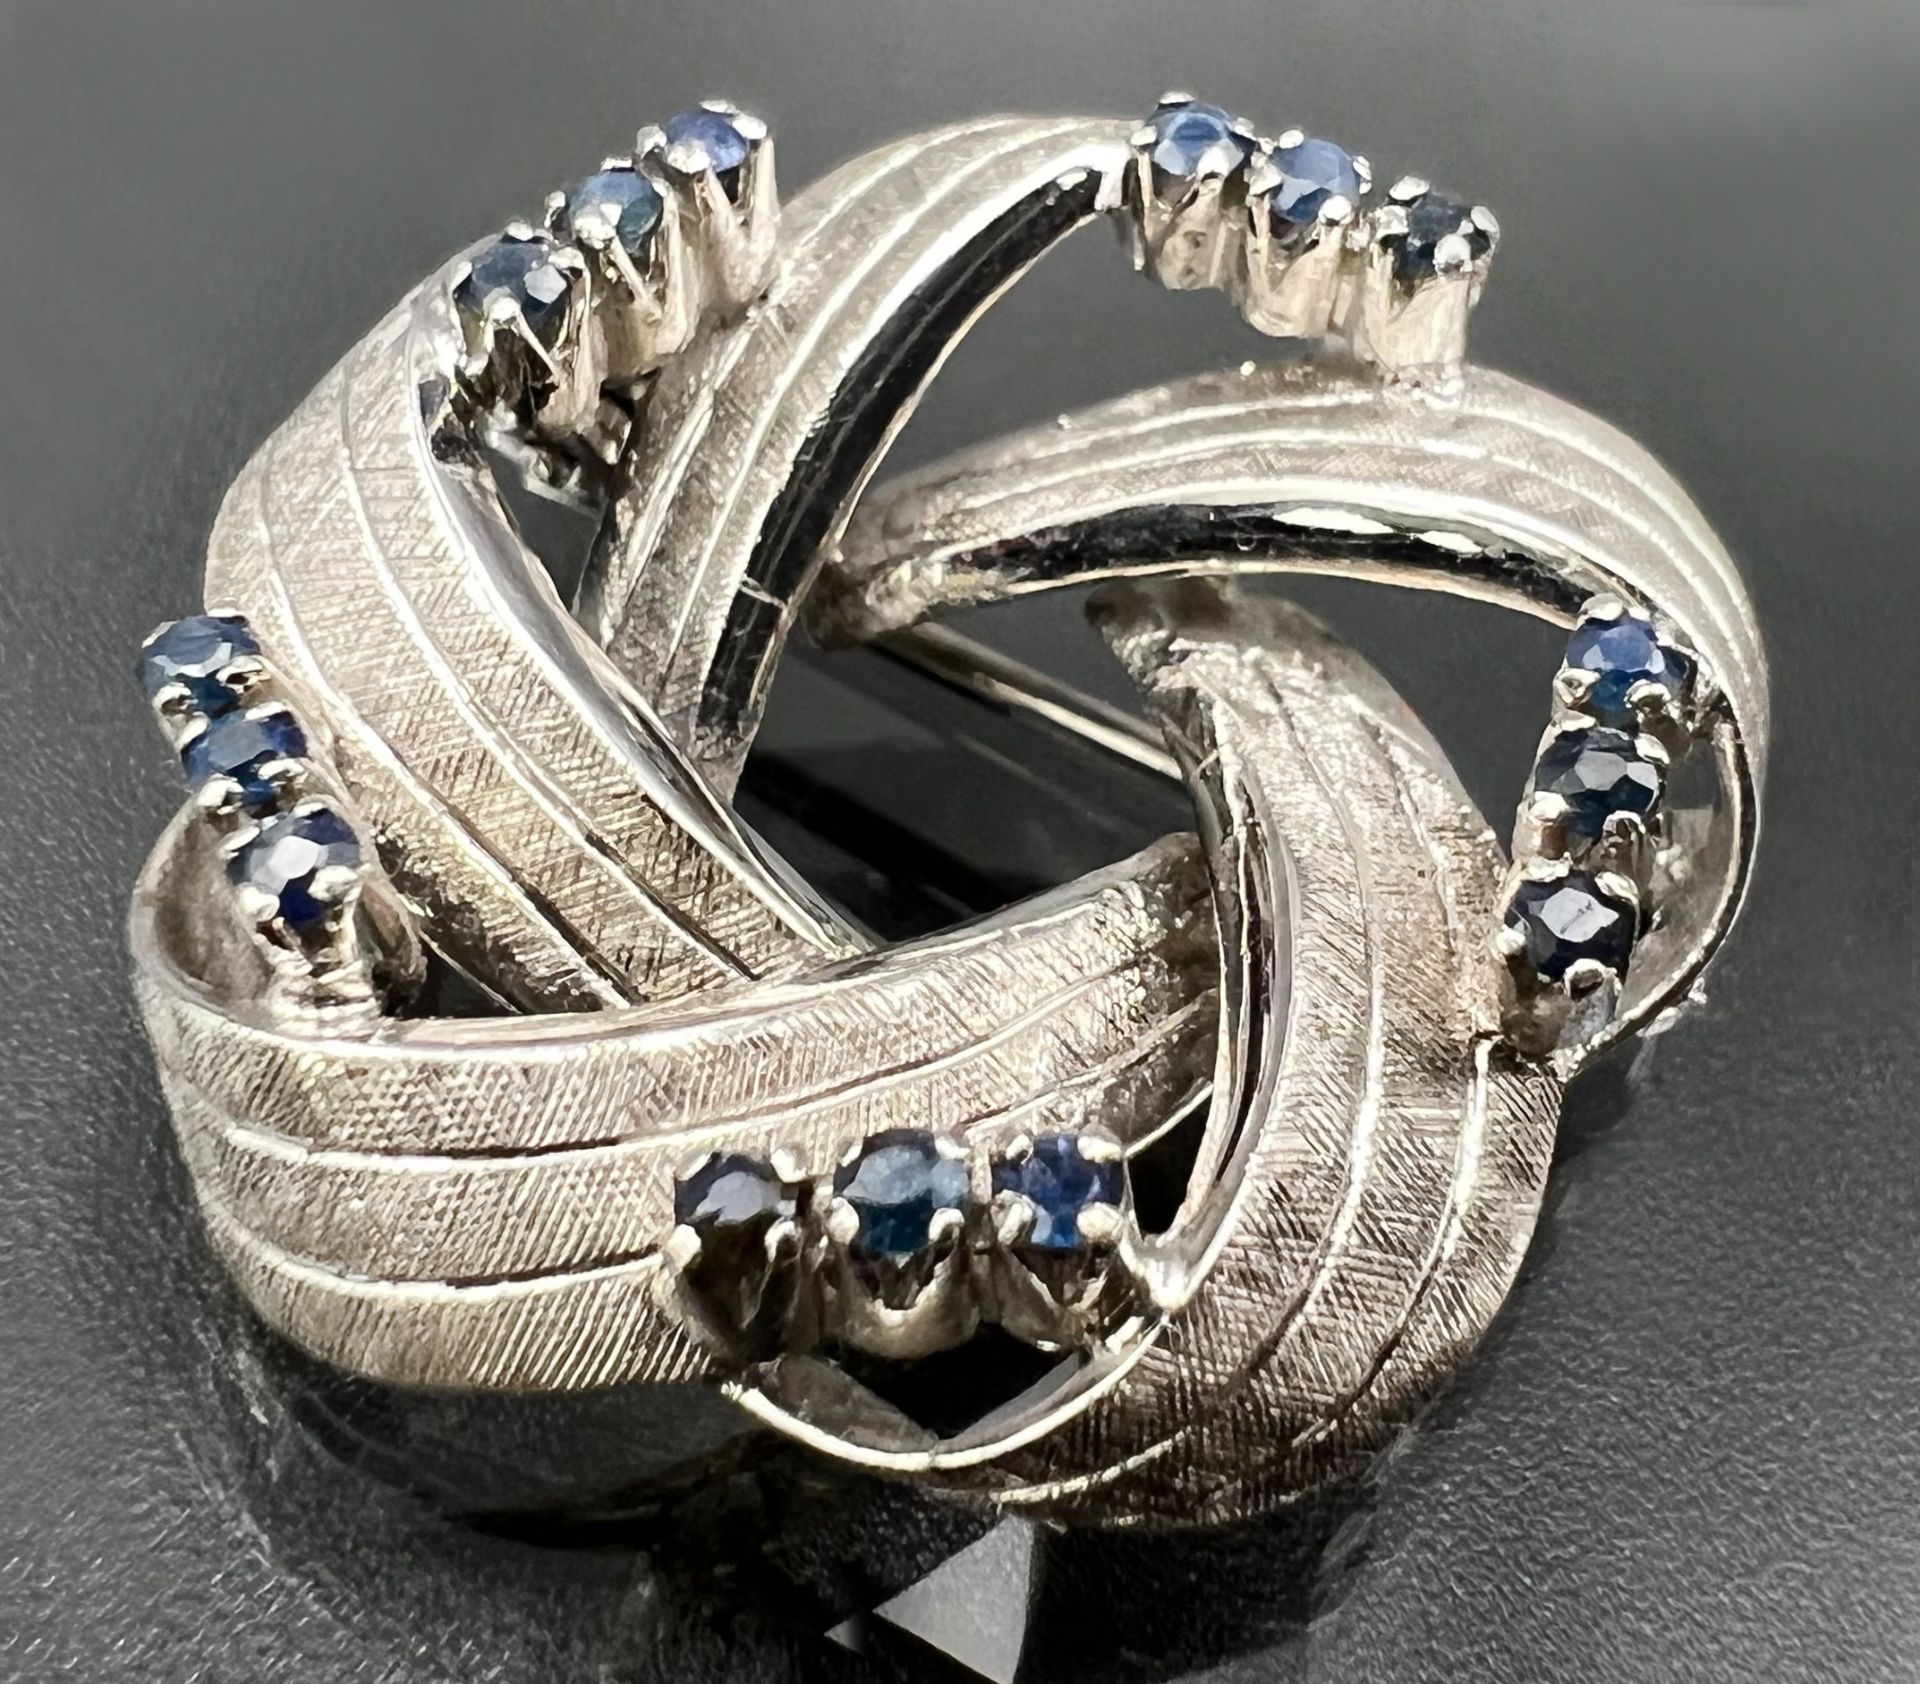 Brooch in loop shape 750 white gold with sapphires. - Image 2 of 6